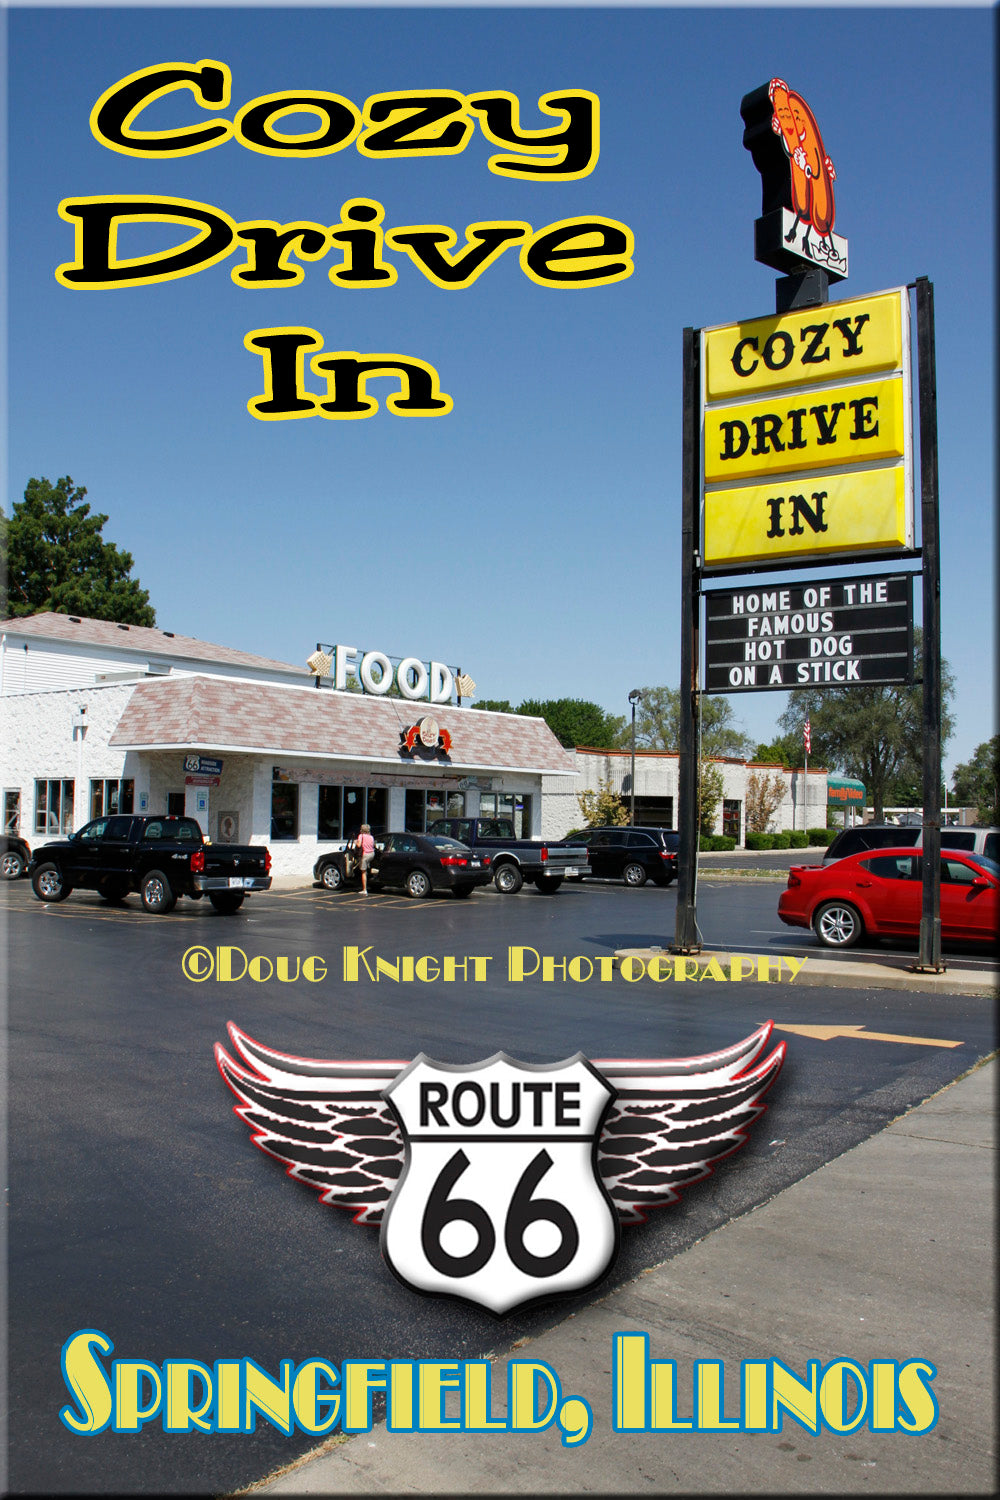 Route 66 Magnet showing the Cozy Drive In located in Springfield, IL